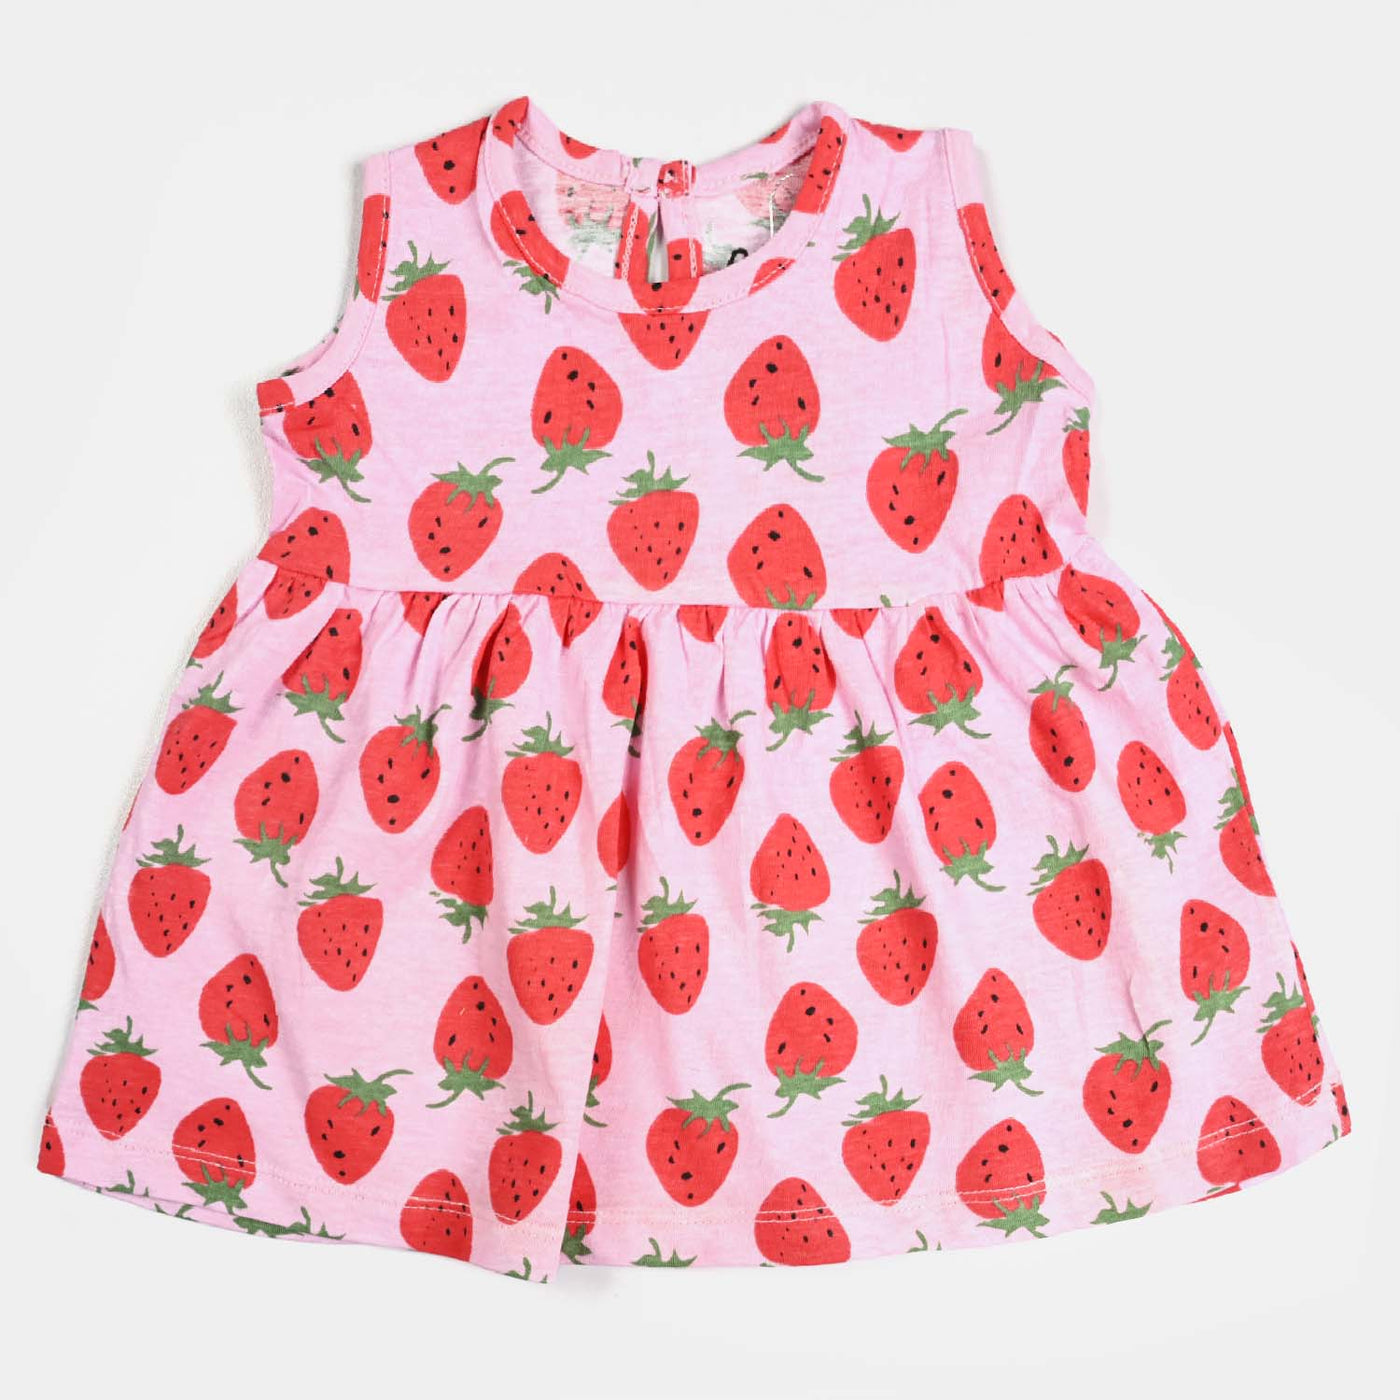 Infant Girls Cotton Terry Knitted Frock Strawberry-Printed